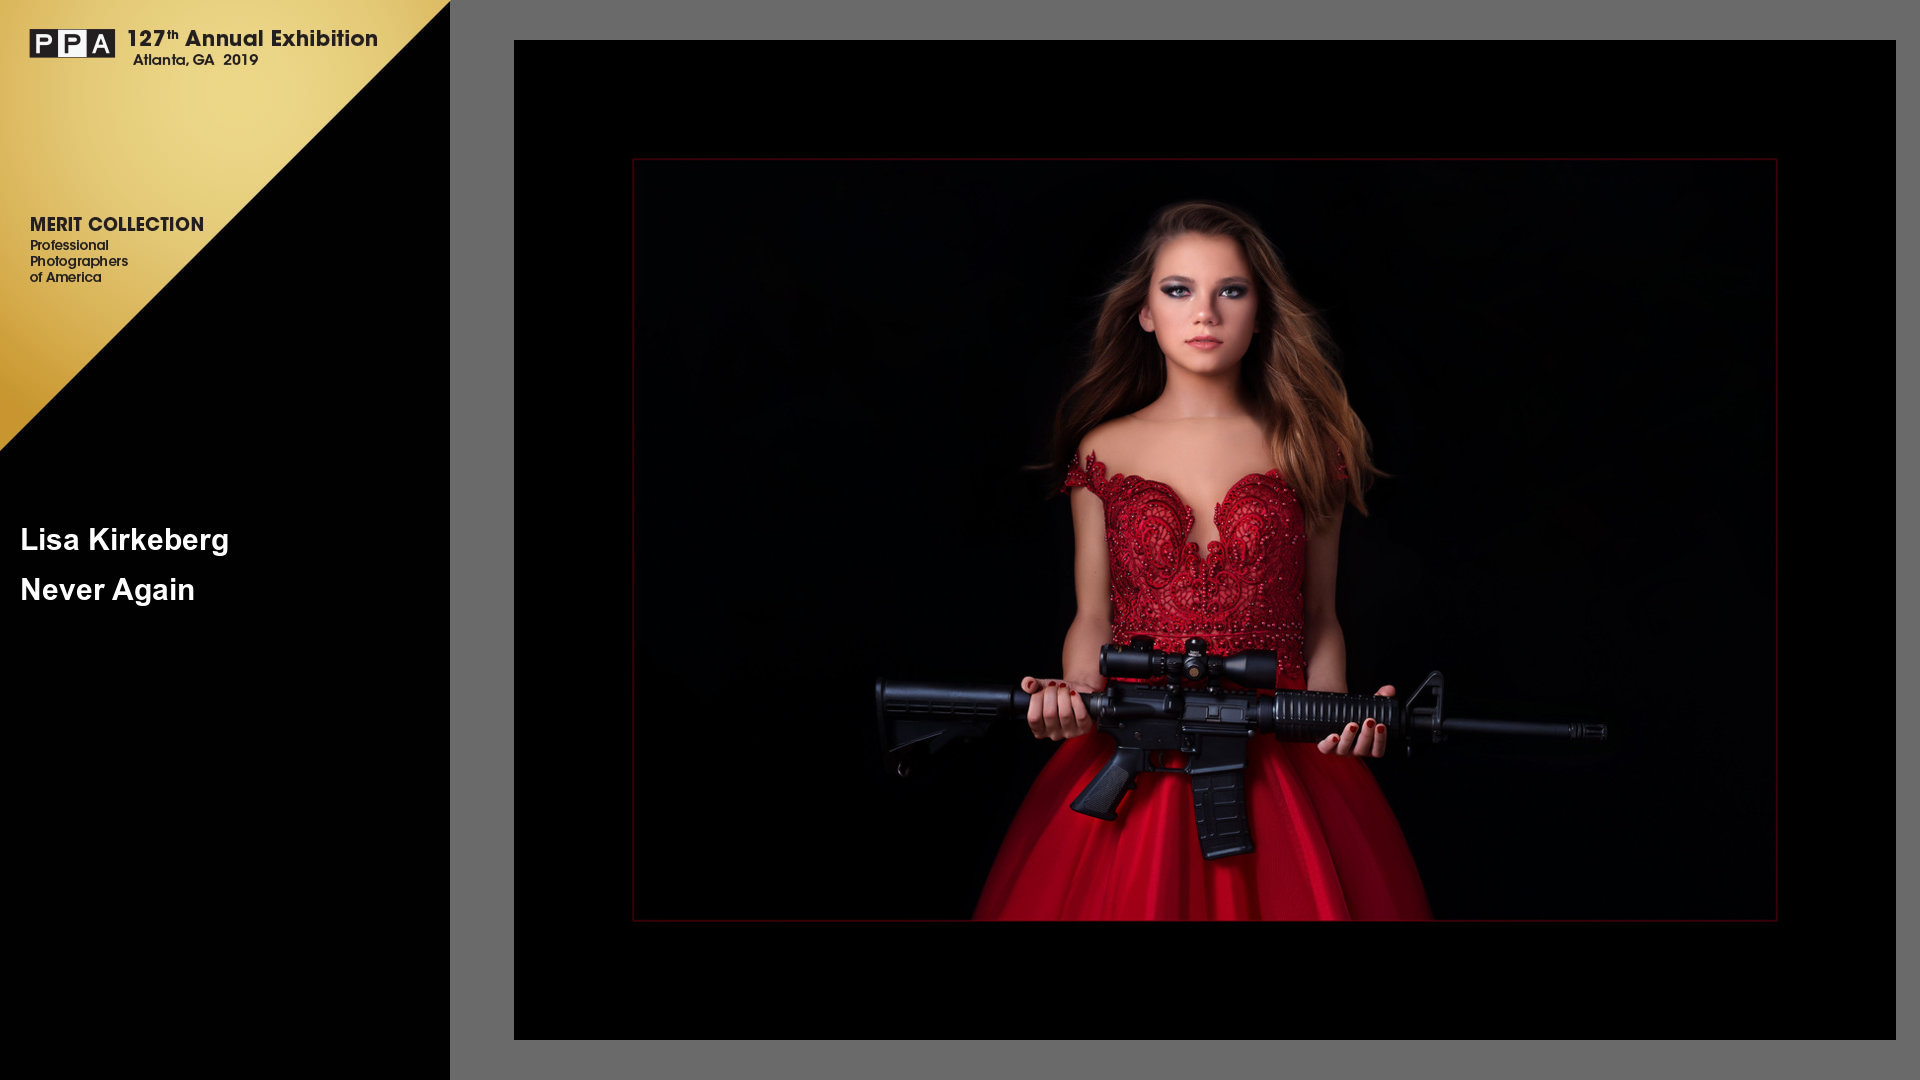 art photography - young girl in red dress holding assault rifle